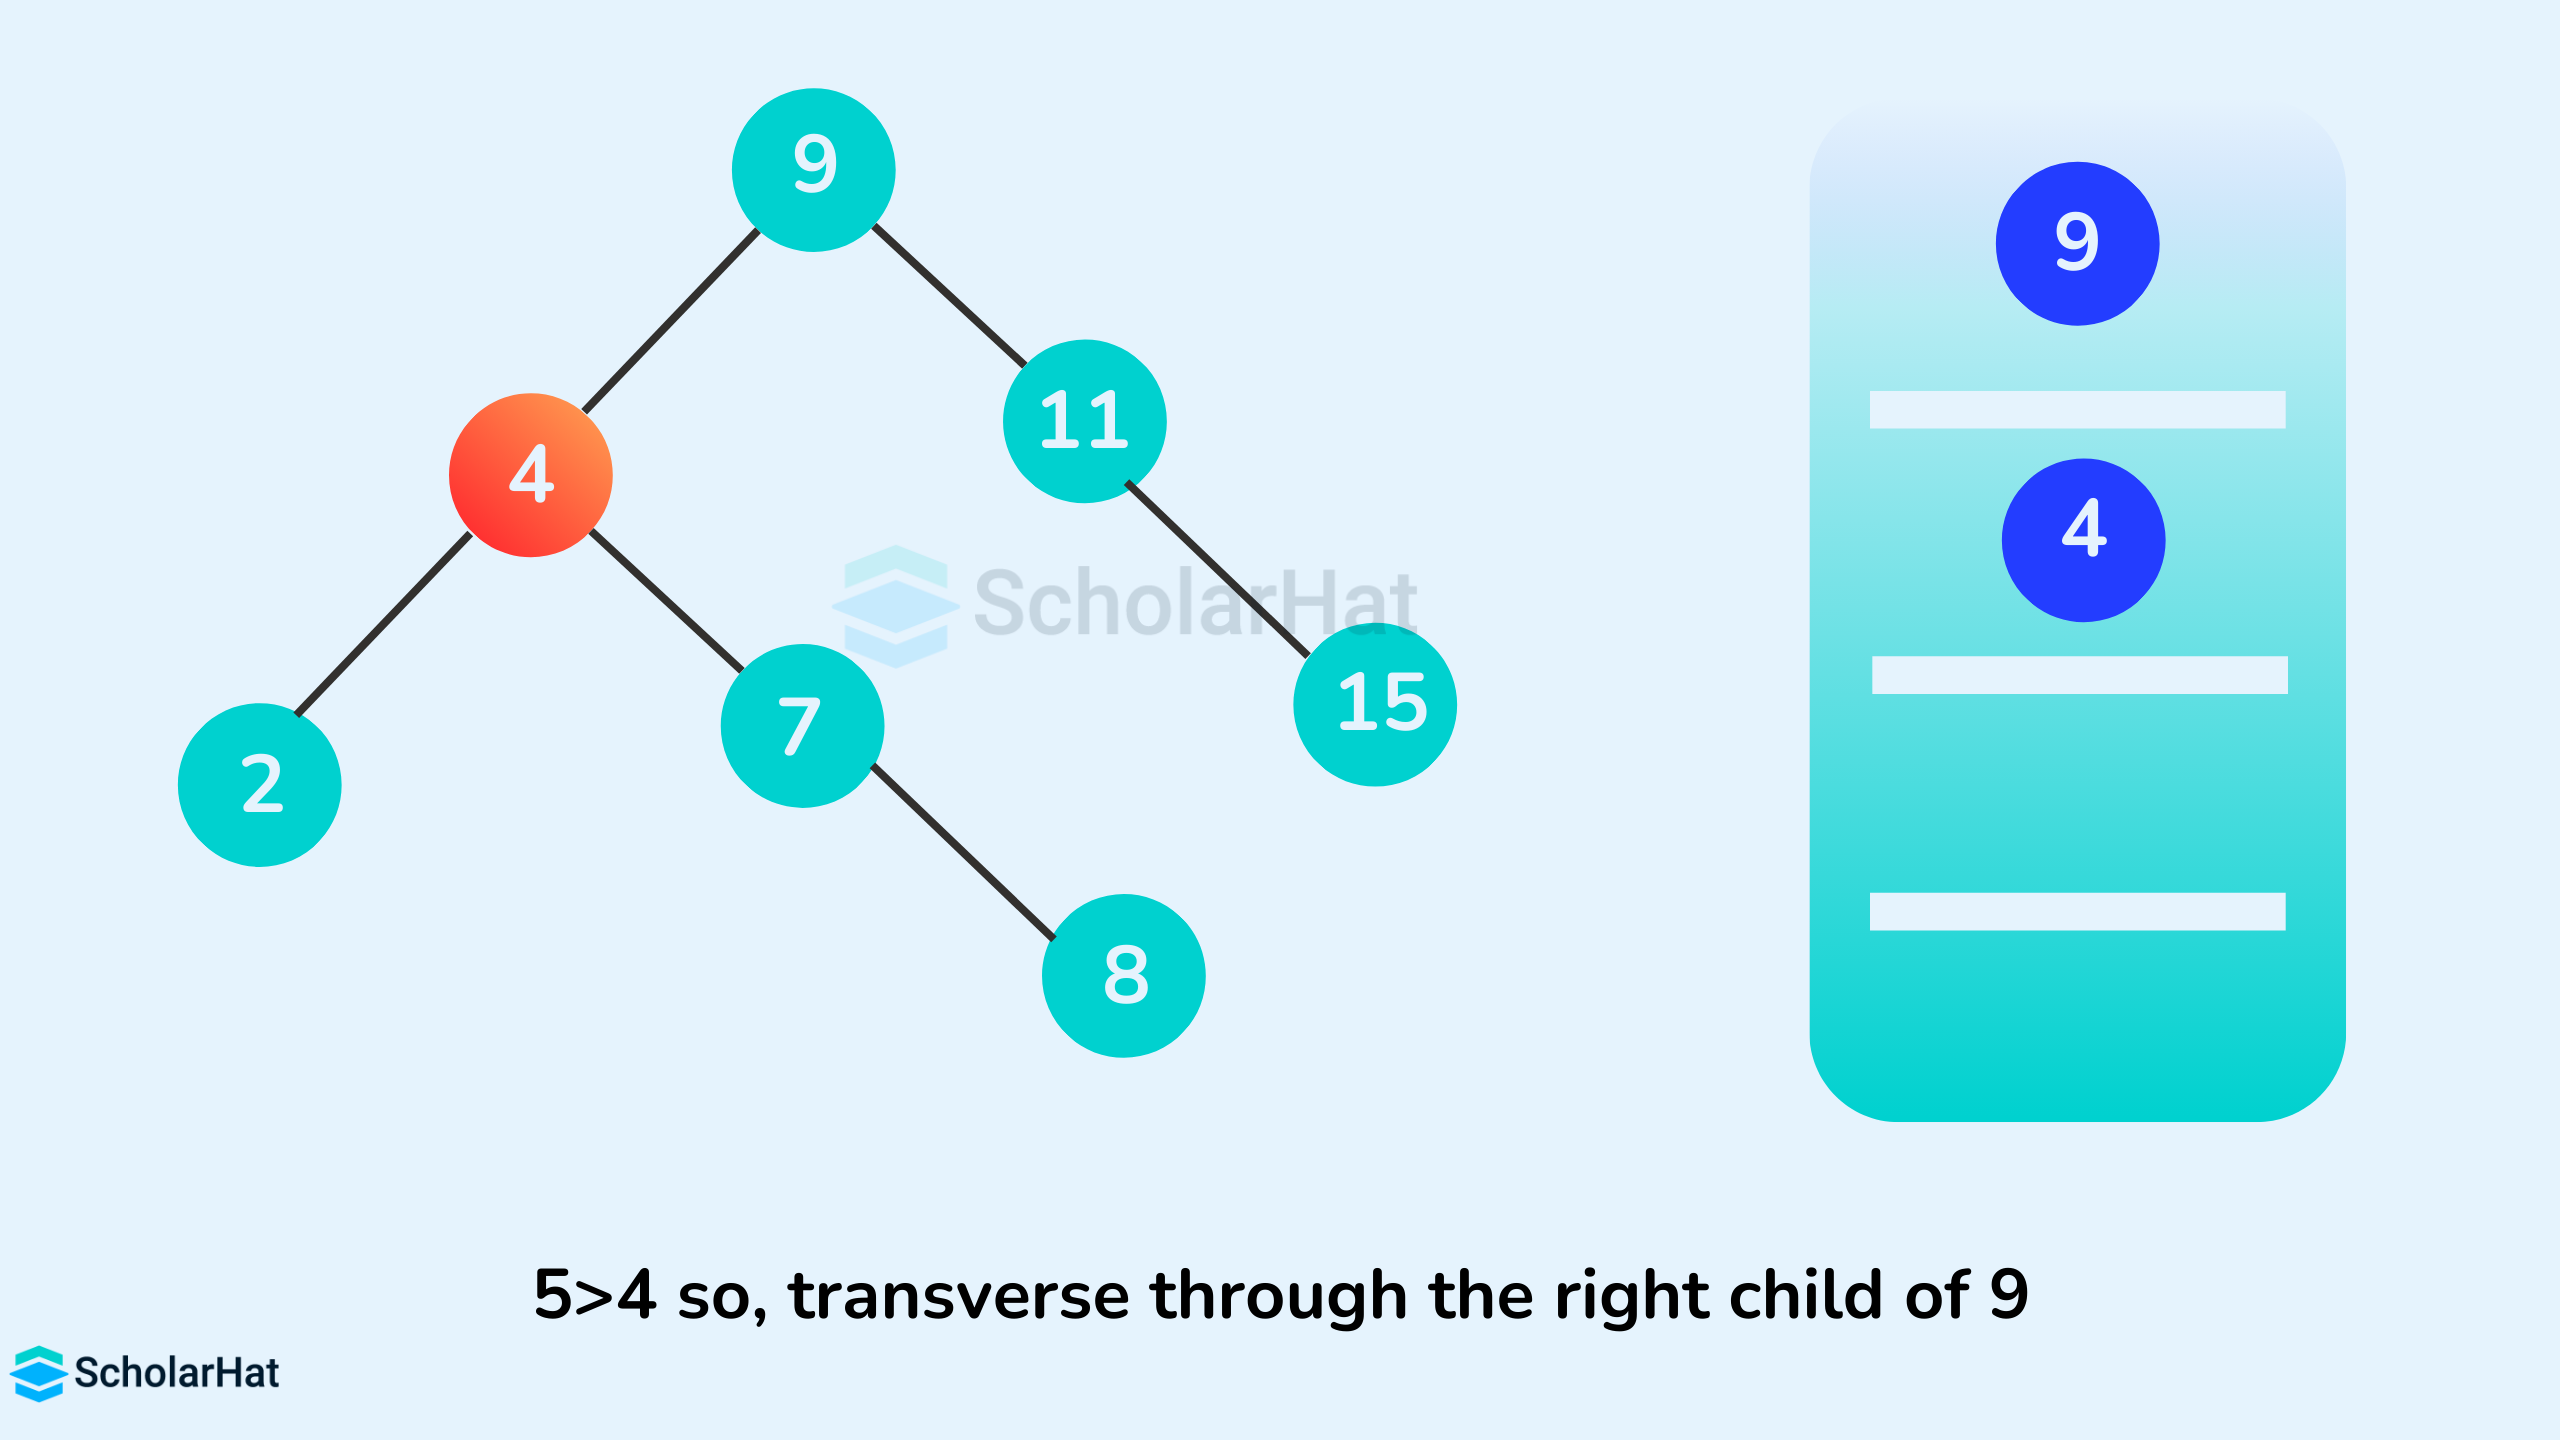 5>4 so, transverse through the right child of 9